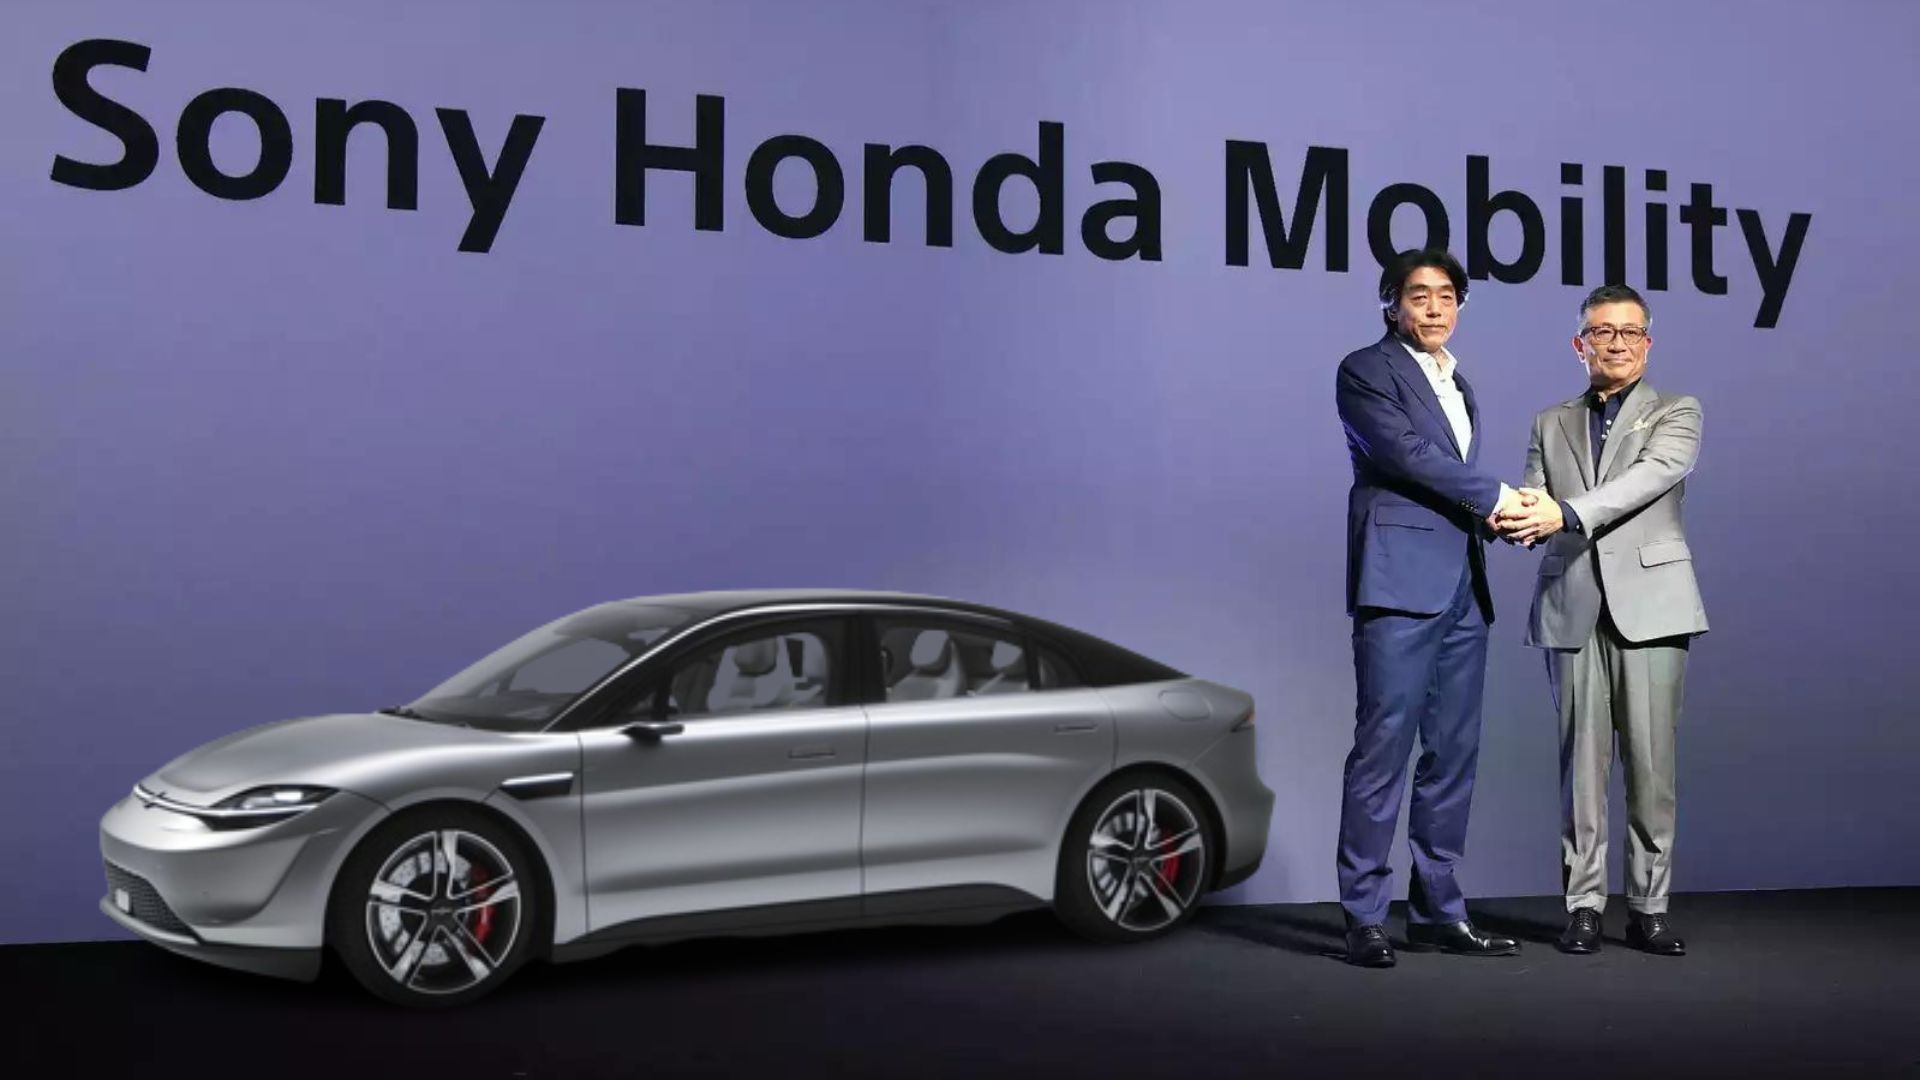 https://e-vehicleinfo.com/sony-hondas-first-electric-car-to-hit-the-market-by-2026/